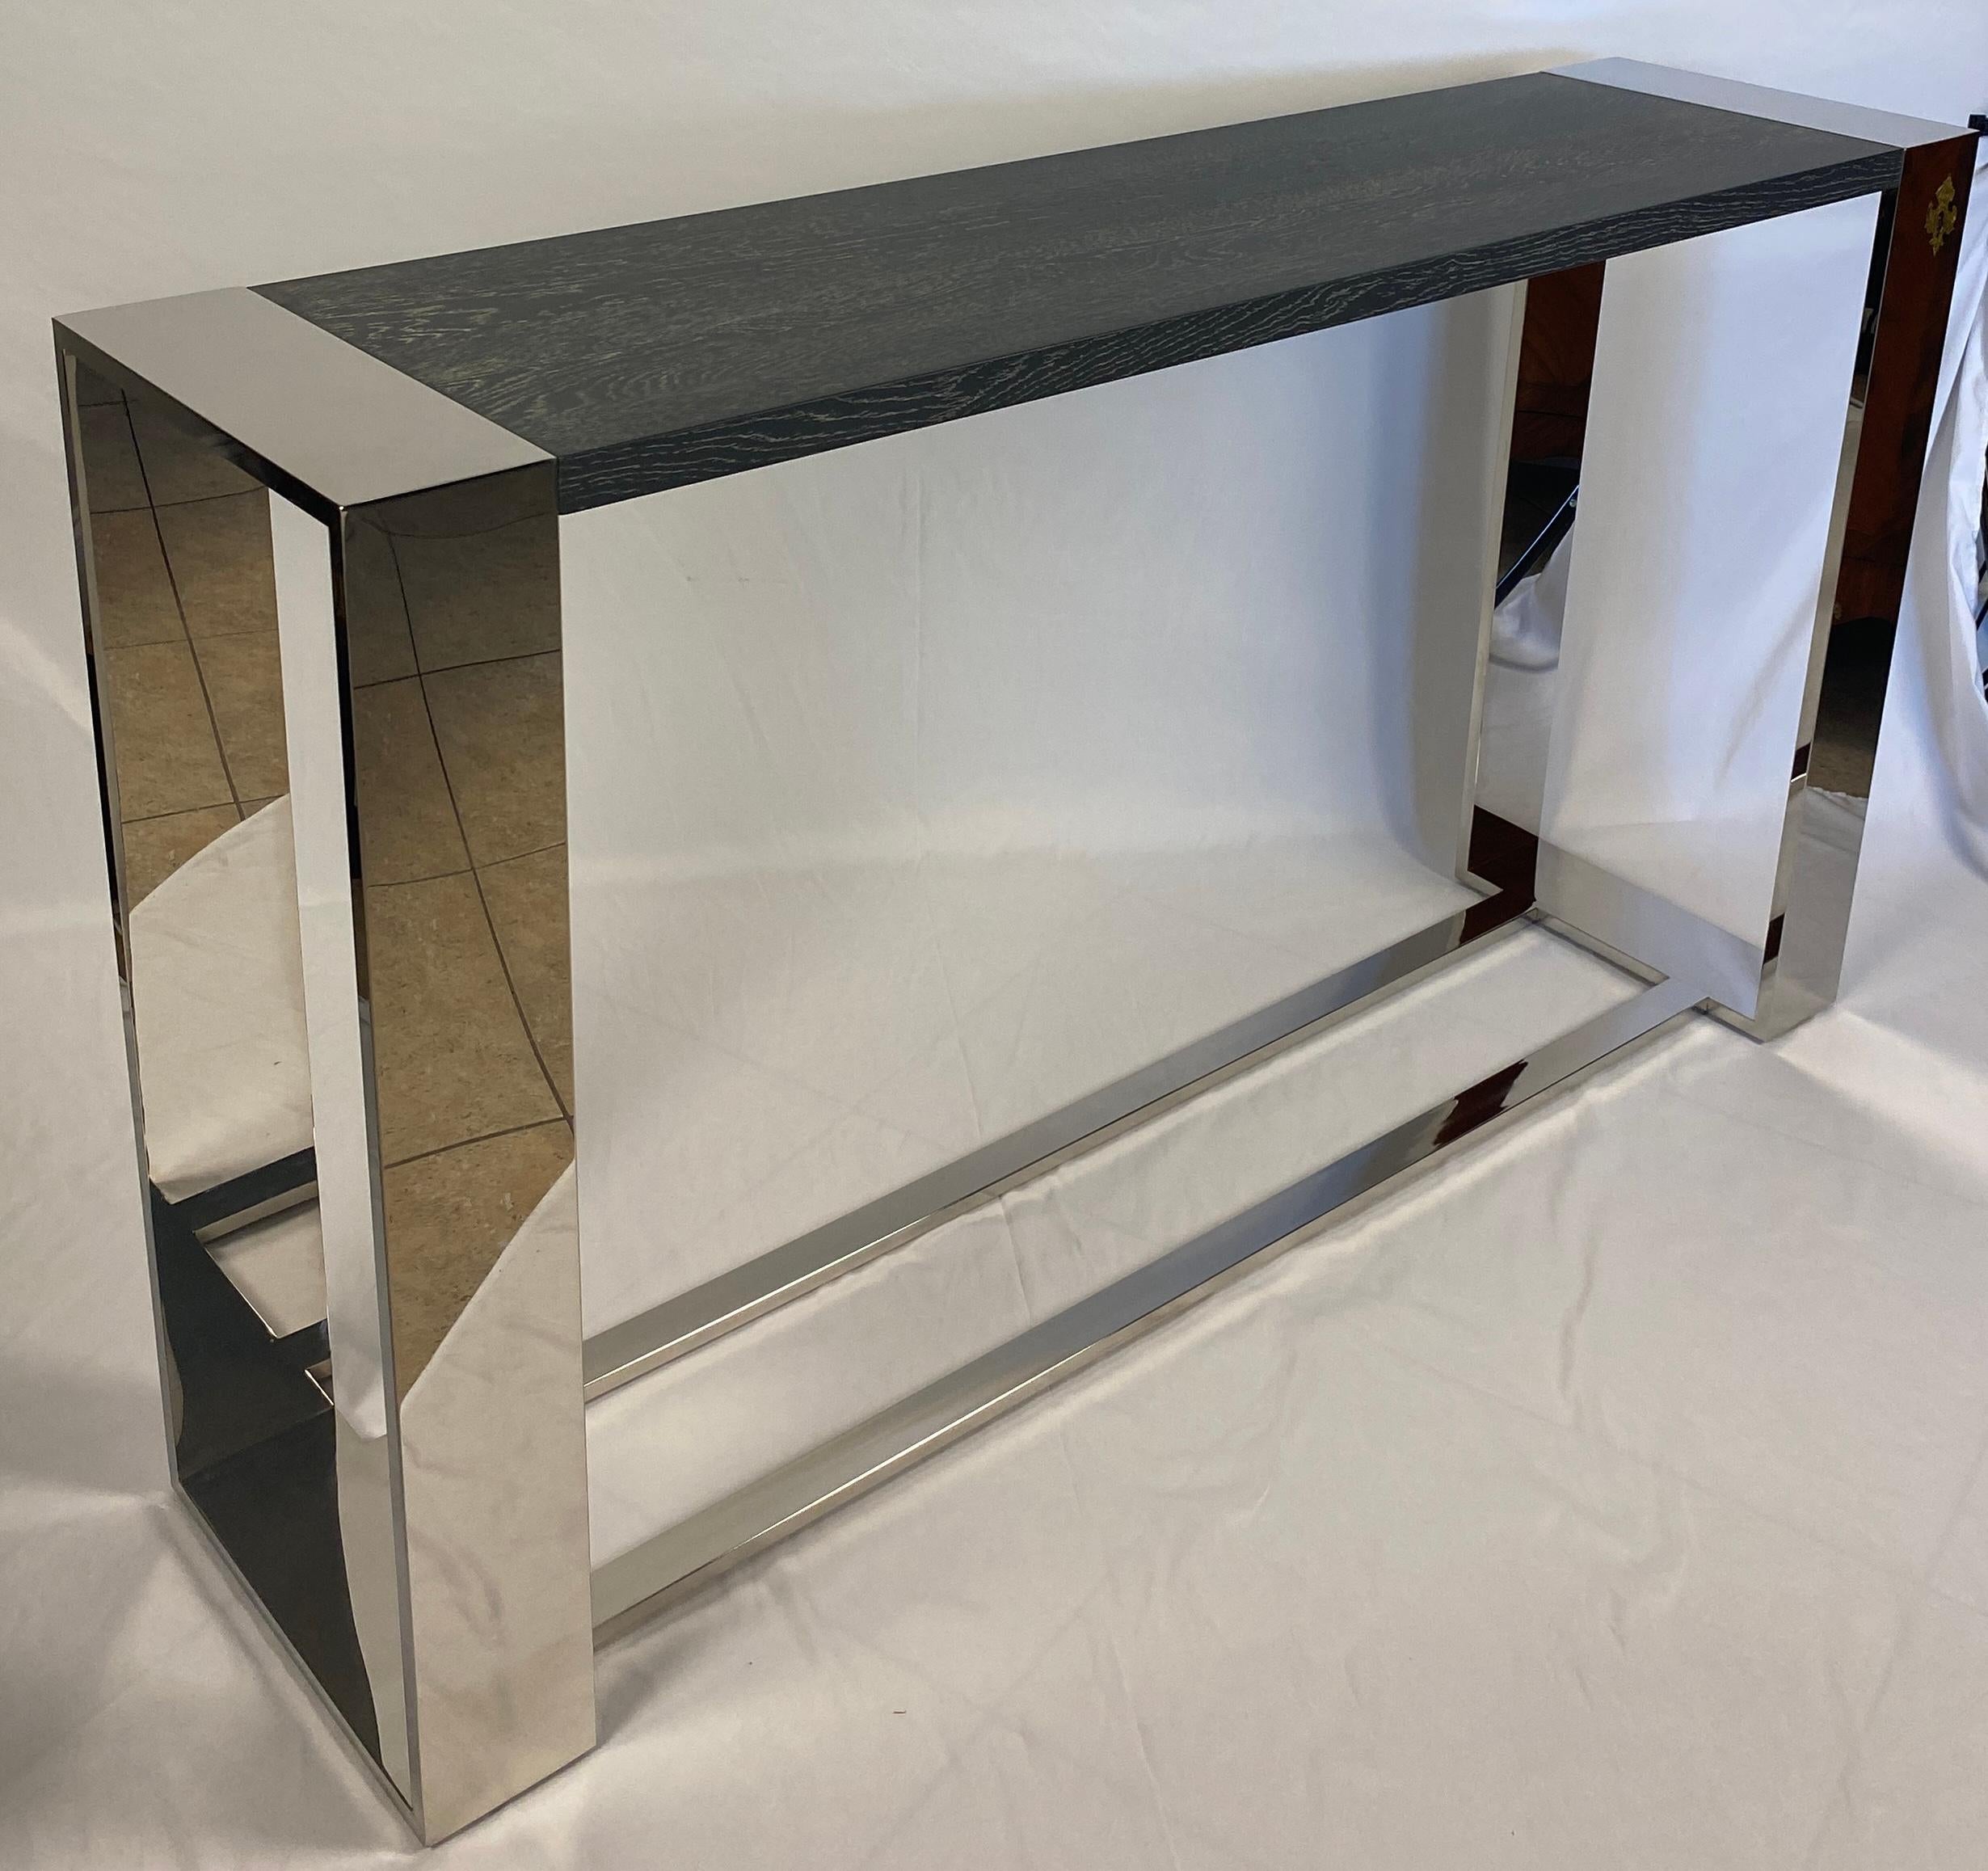 A good quality chrome and wood top console table or sofa table. 
The wood top is finished in a light gray painted adding details to the chrome base. All wood is kiln-dried for durability. 

Chrome legs and base for a more versatile look that would